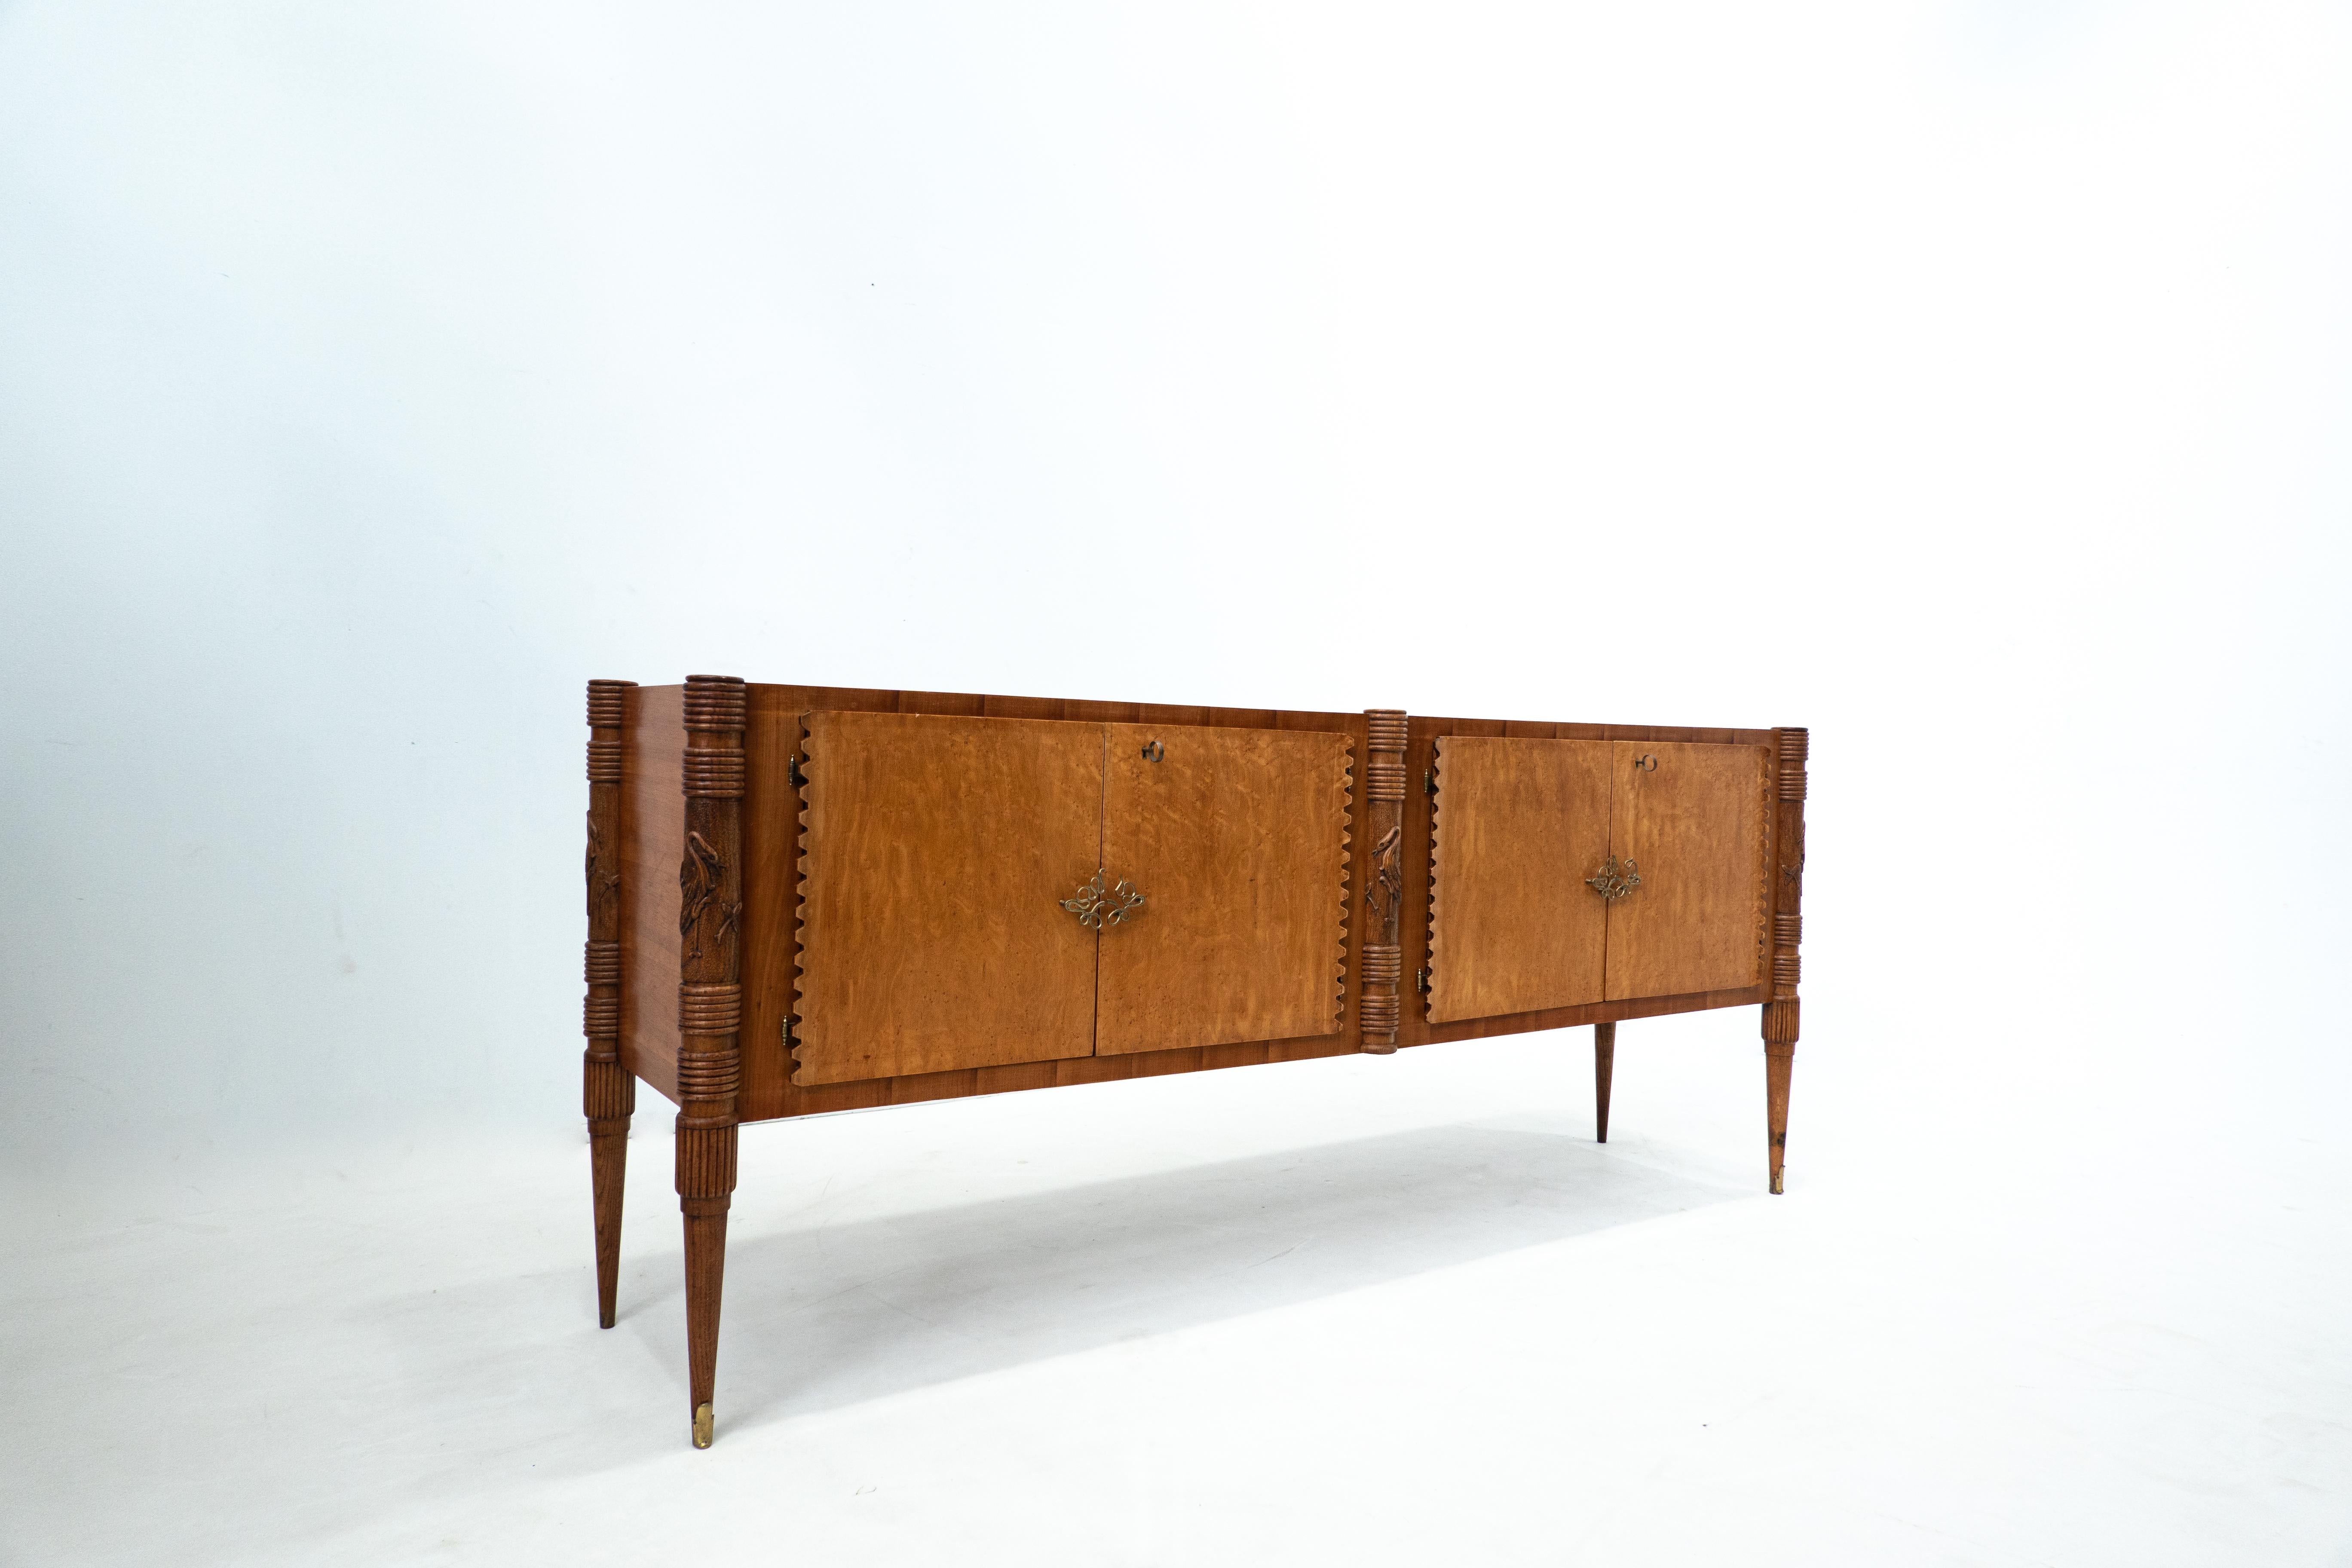 Large Italian Wooden Sideboard by Pier Luigi Colli with Four Doors, 1940s For Sale 3